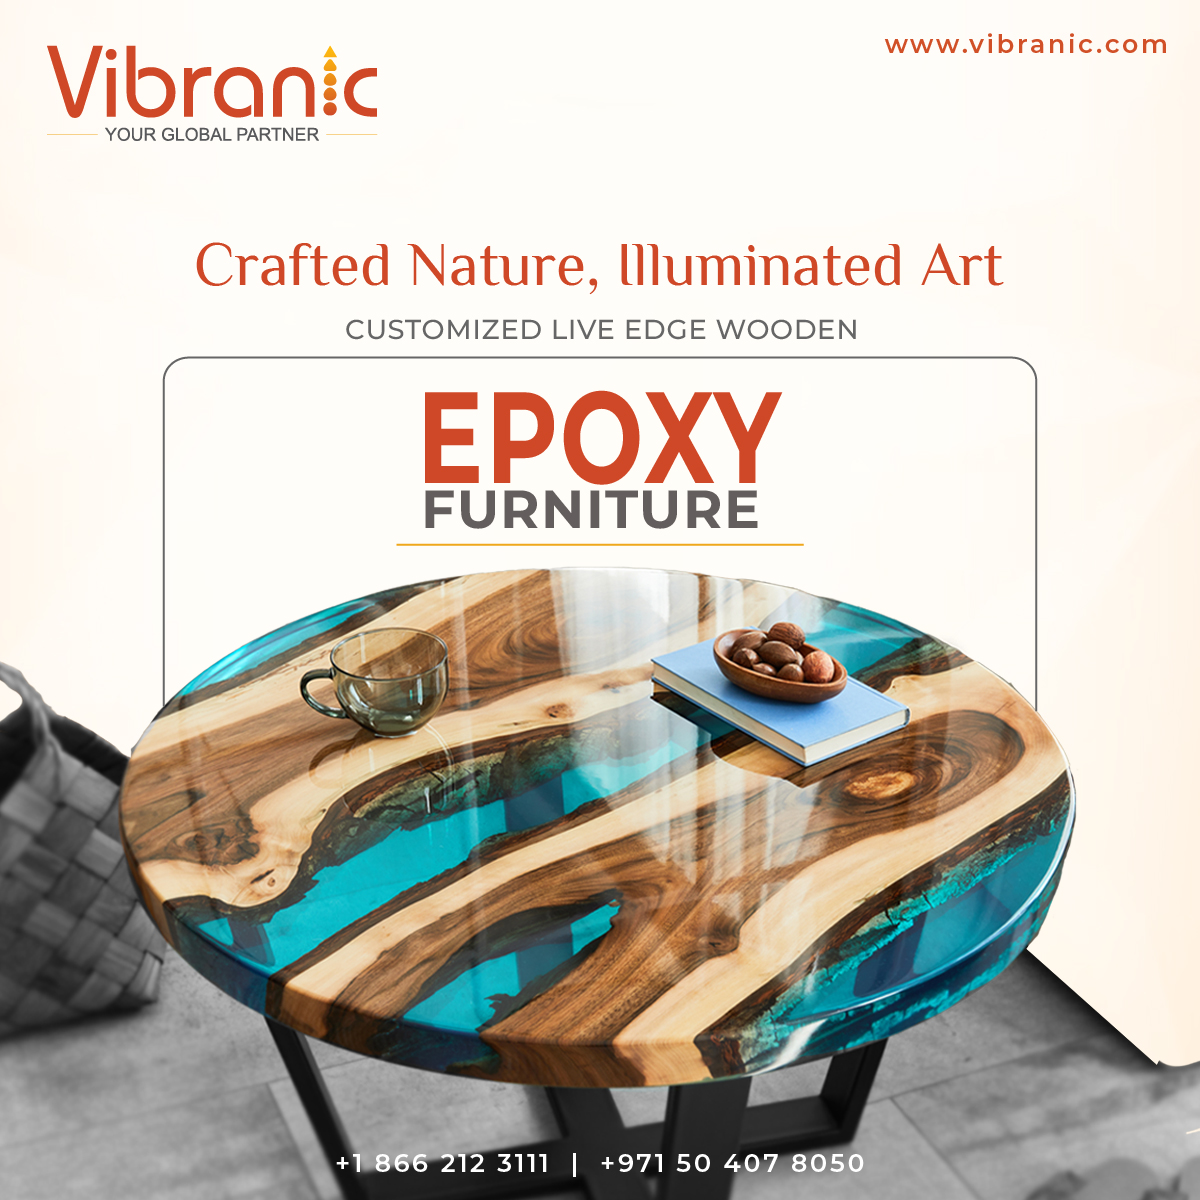 Unleash the Extraordinary: Discover the Captivating Beauty of Live Edge Wooden Epoxy Furniture. Customized to perfection and crafted with Passion.

For more details, please reach us at mail@vibranic.com or call us at +1 866 212 3111, +971 504078050

#LiveEdgeEpoxyFurniture